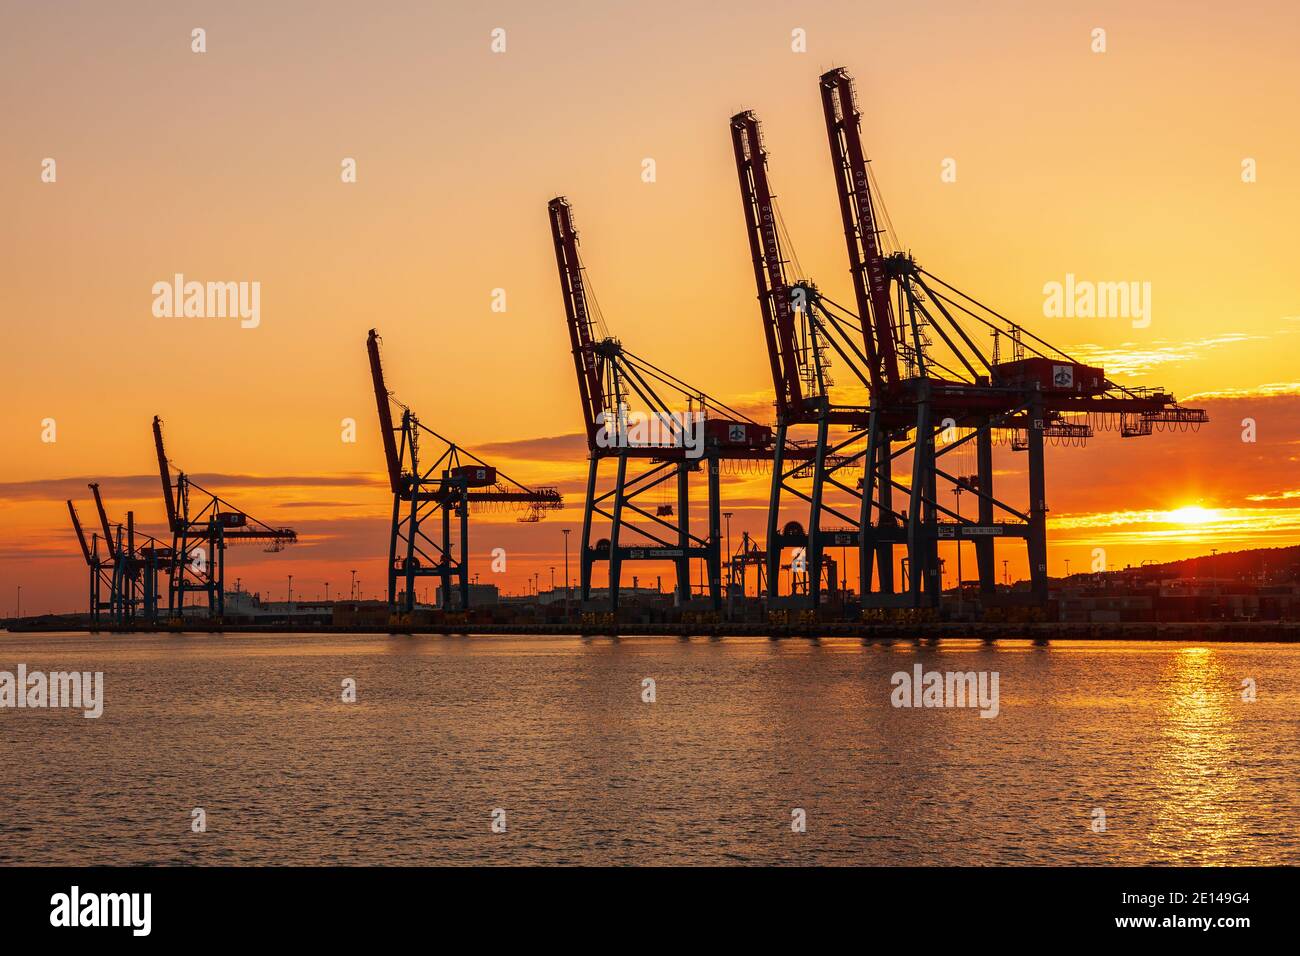 Seaport with container cranes at a beautiful sunset Stock Photo